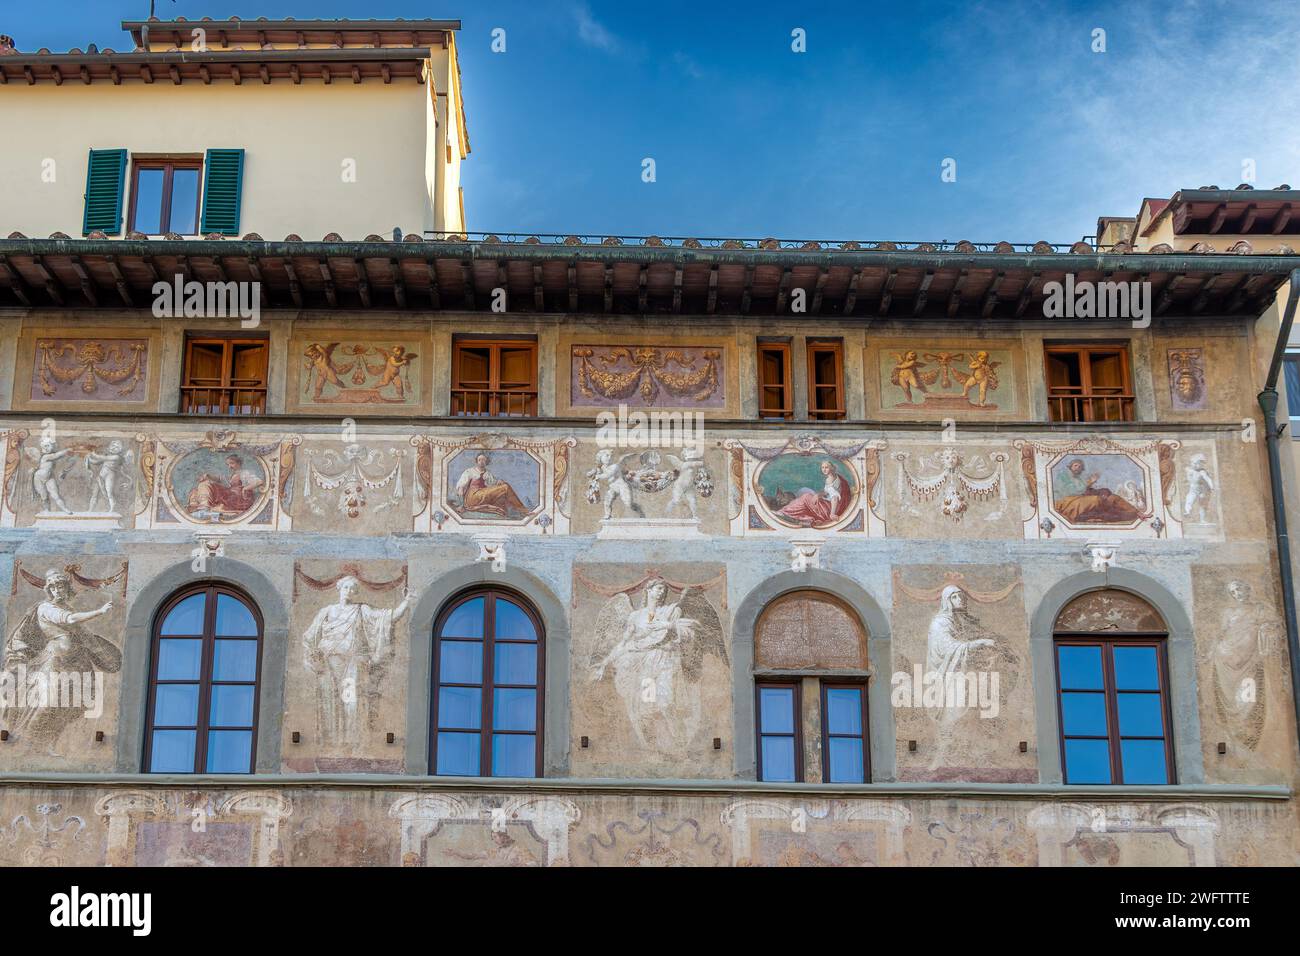 Close up of the elaborate frescoed façade of Palazzo dell'Antella , a medieval palace located in Piazza Santa Croce, Florence, Italy Stock Photo